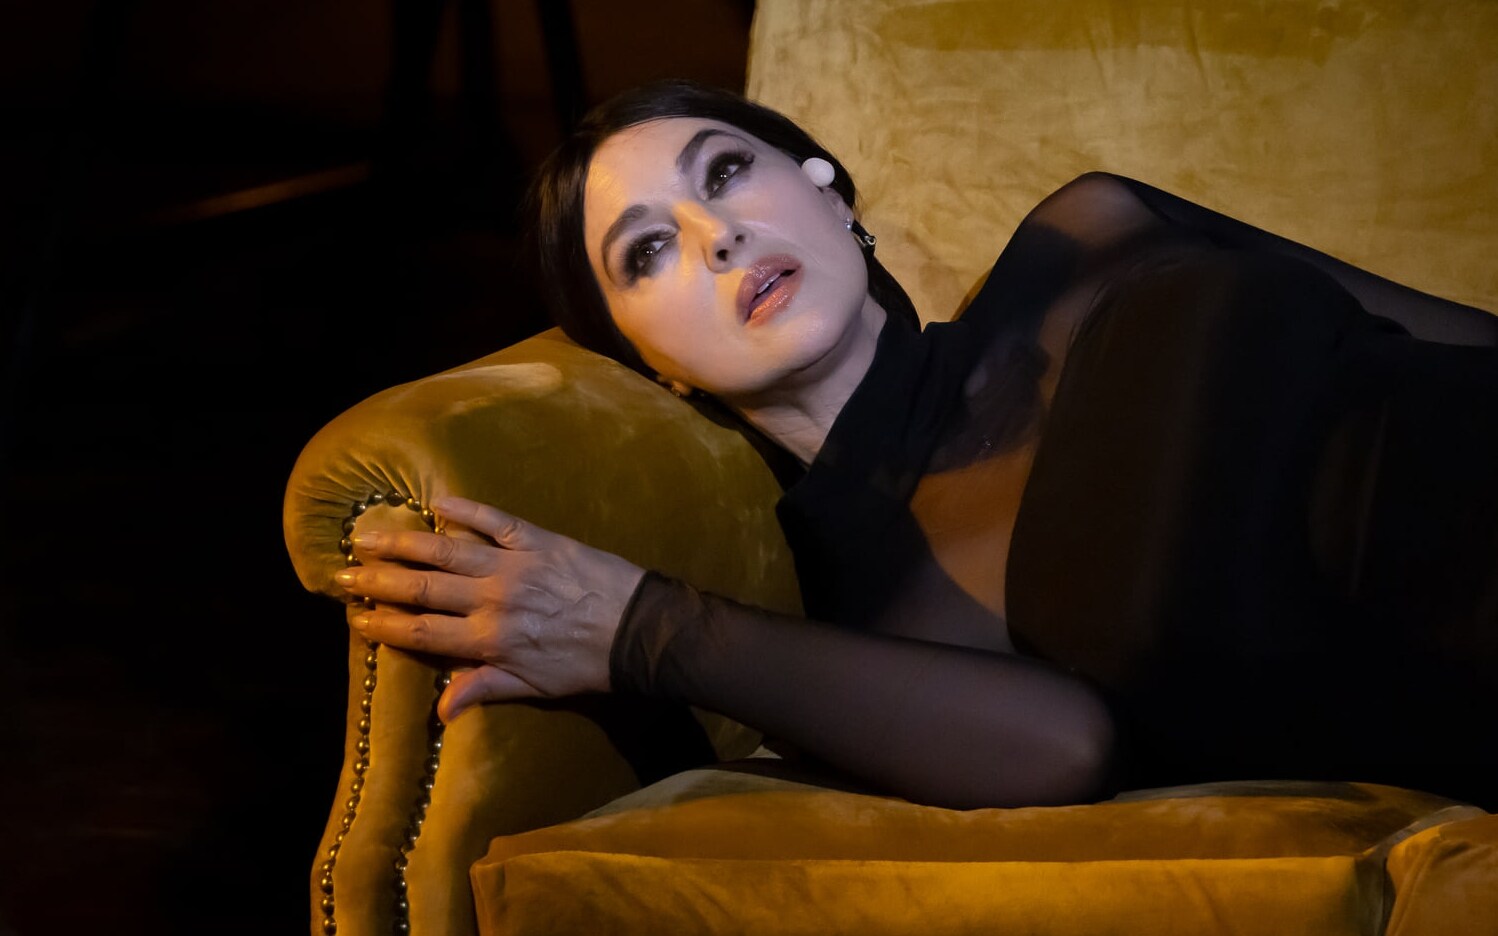 Monica Bellucci is Maria Callas, on stage at the Manzoni Theater in Milan